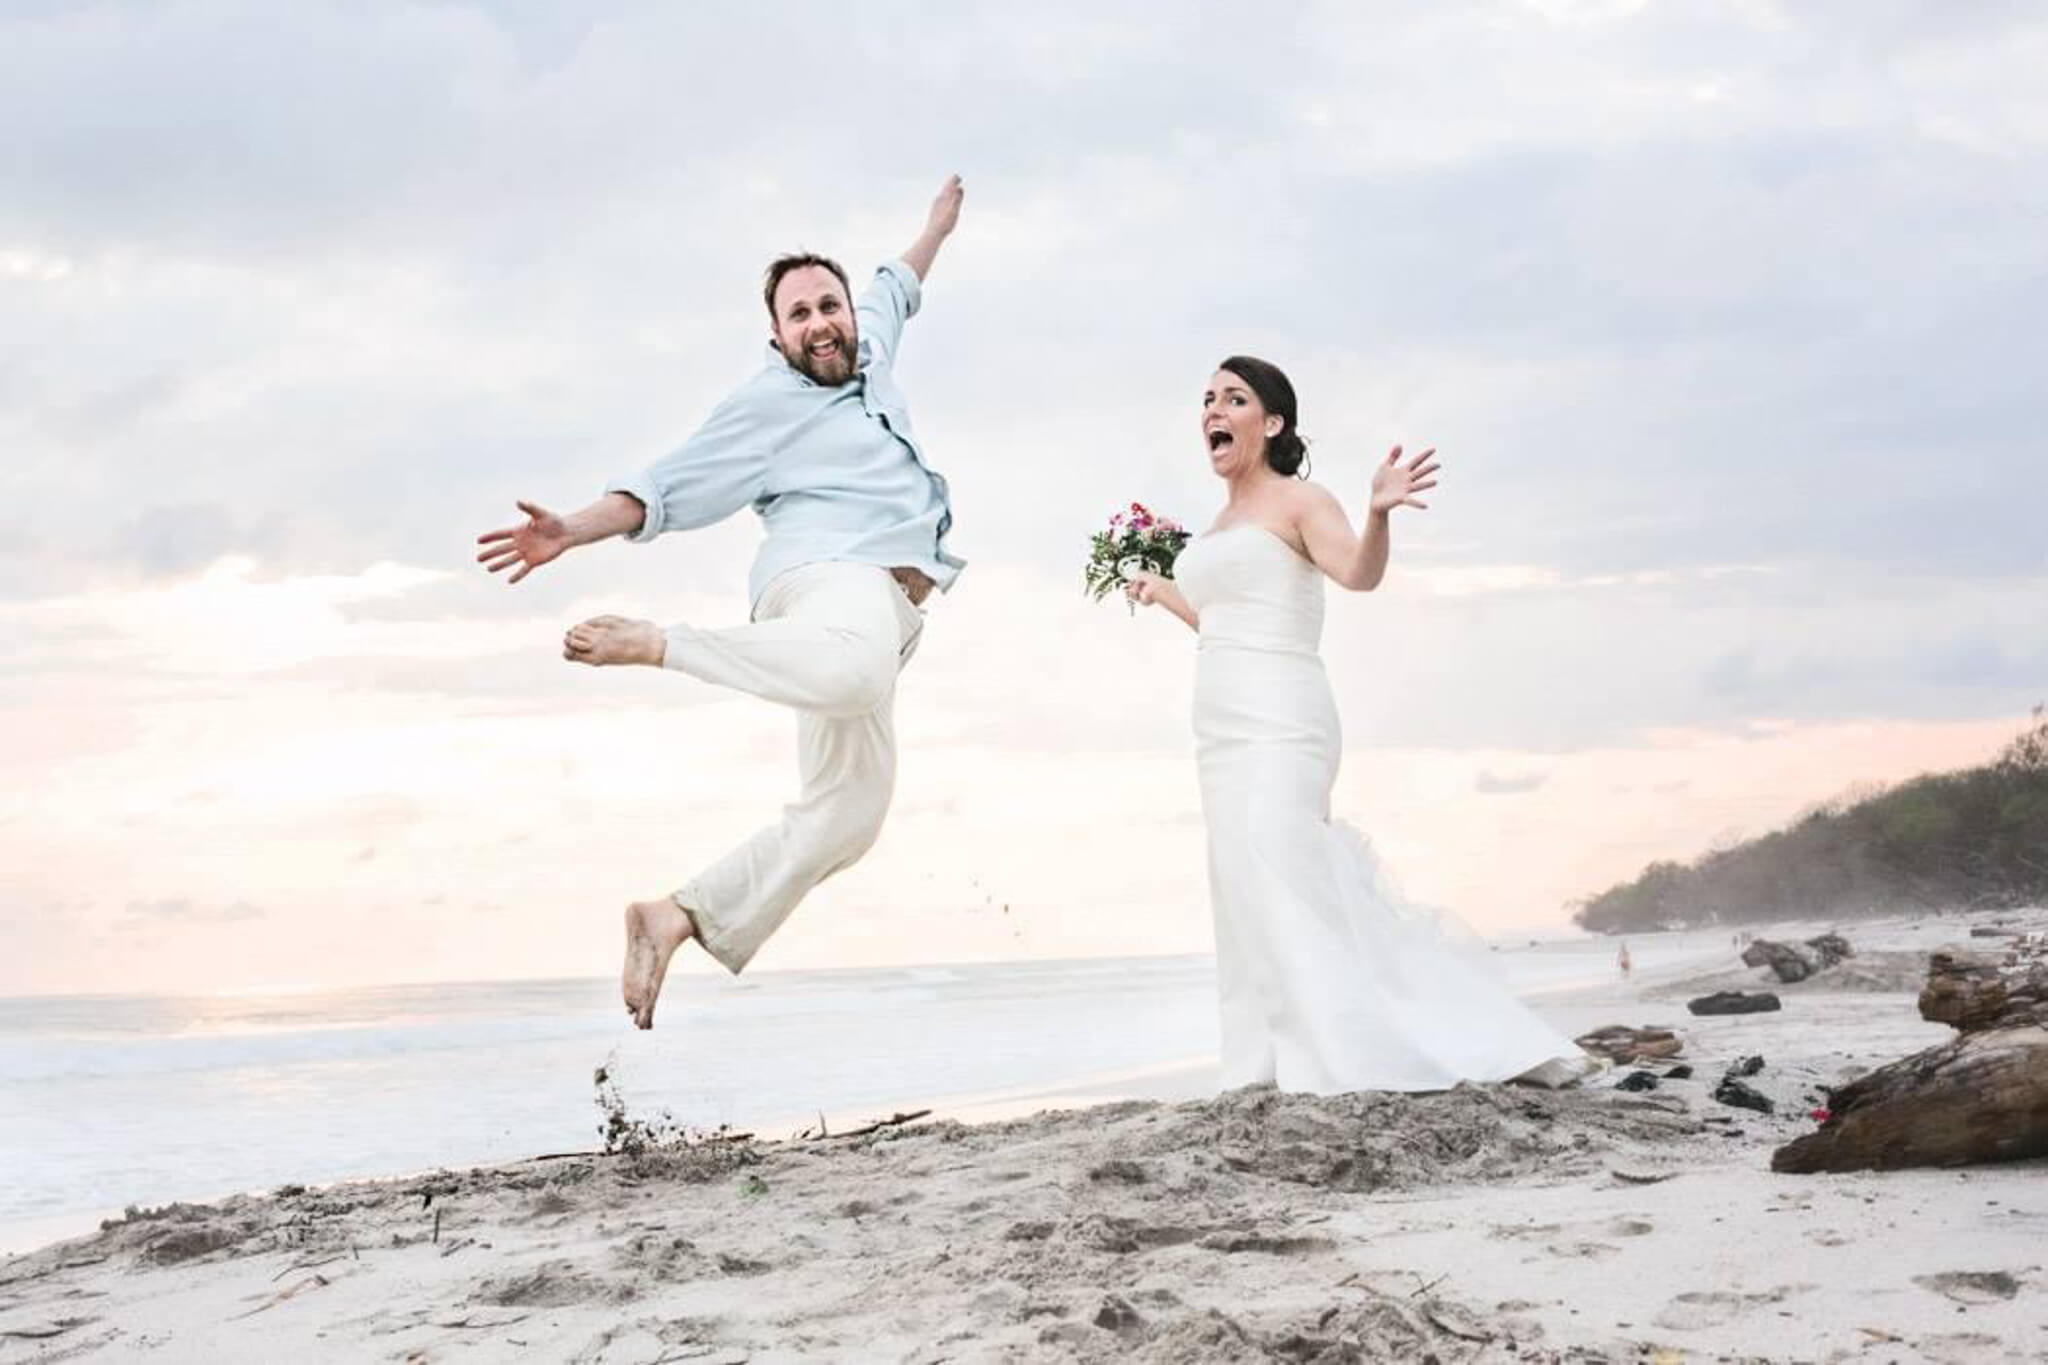 Jessica Strobel in her wedding dress on a beach, while her husband jumps into the air wearing linen